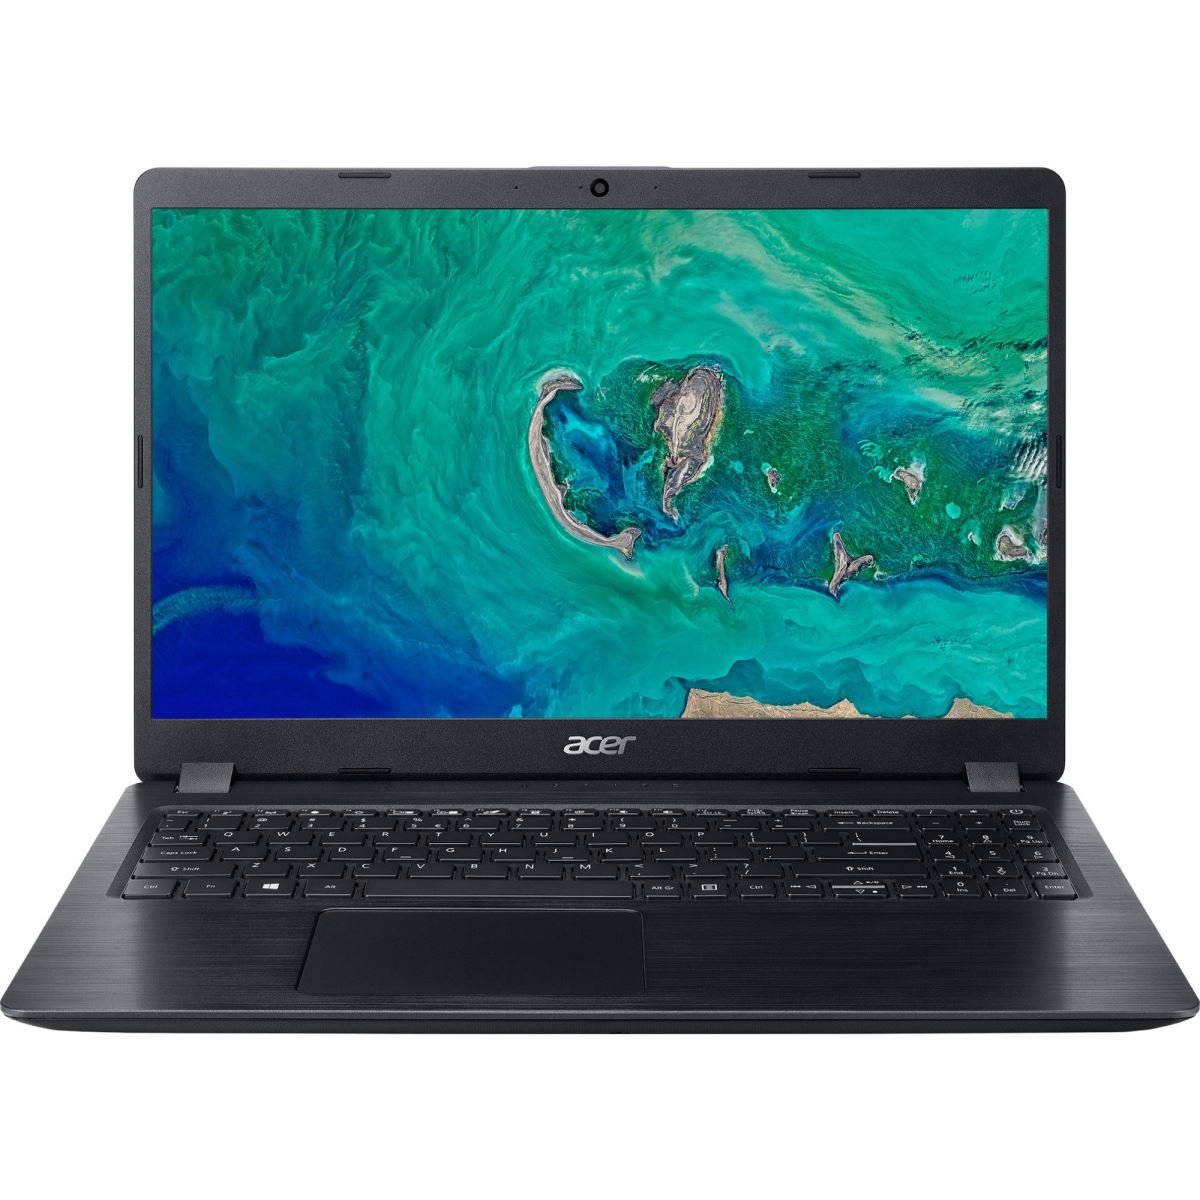 Laptop Acer Aspire 5 A515-52G-56J4, 15.6" FHD Acer ComfyView LED LCD, Intel® Core™ i5-8265U, NVIDIA® GeForce® MX130 2GB, 8GB DDR4, HDD 1000 GB, Boot-up Linux